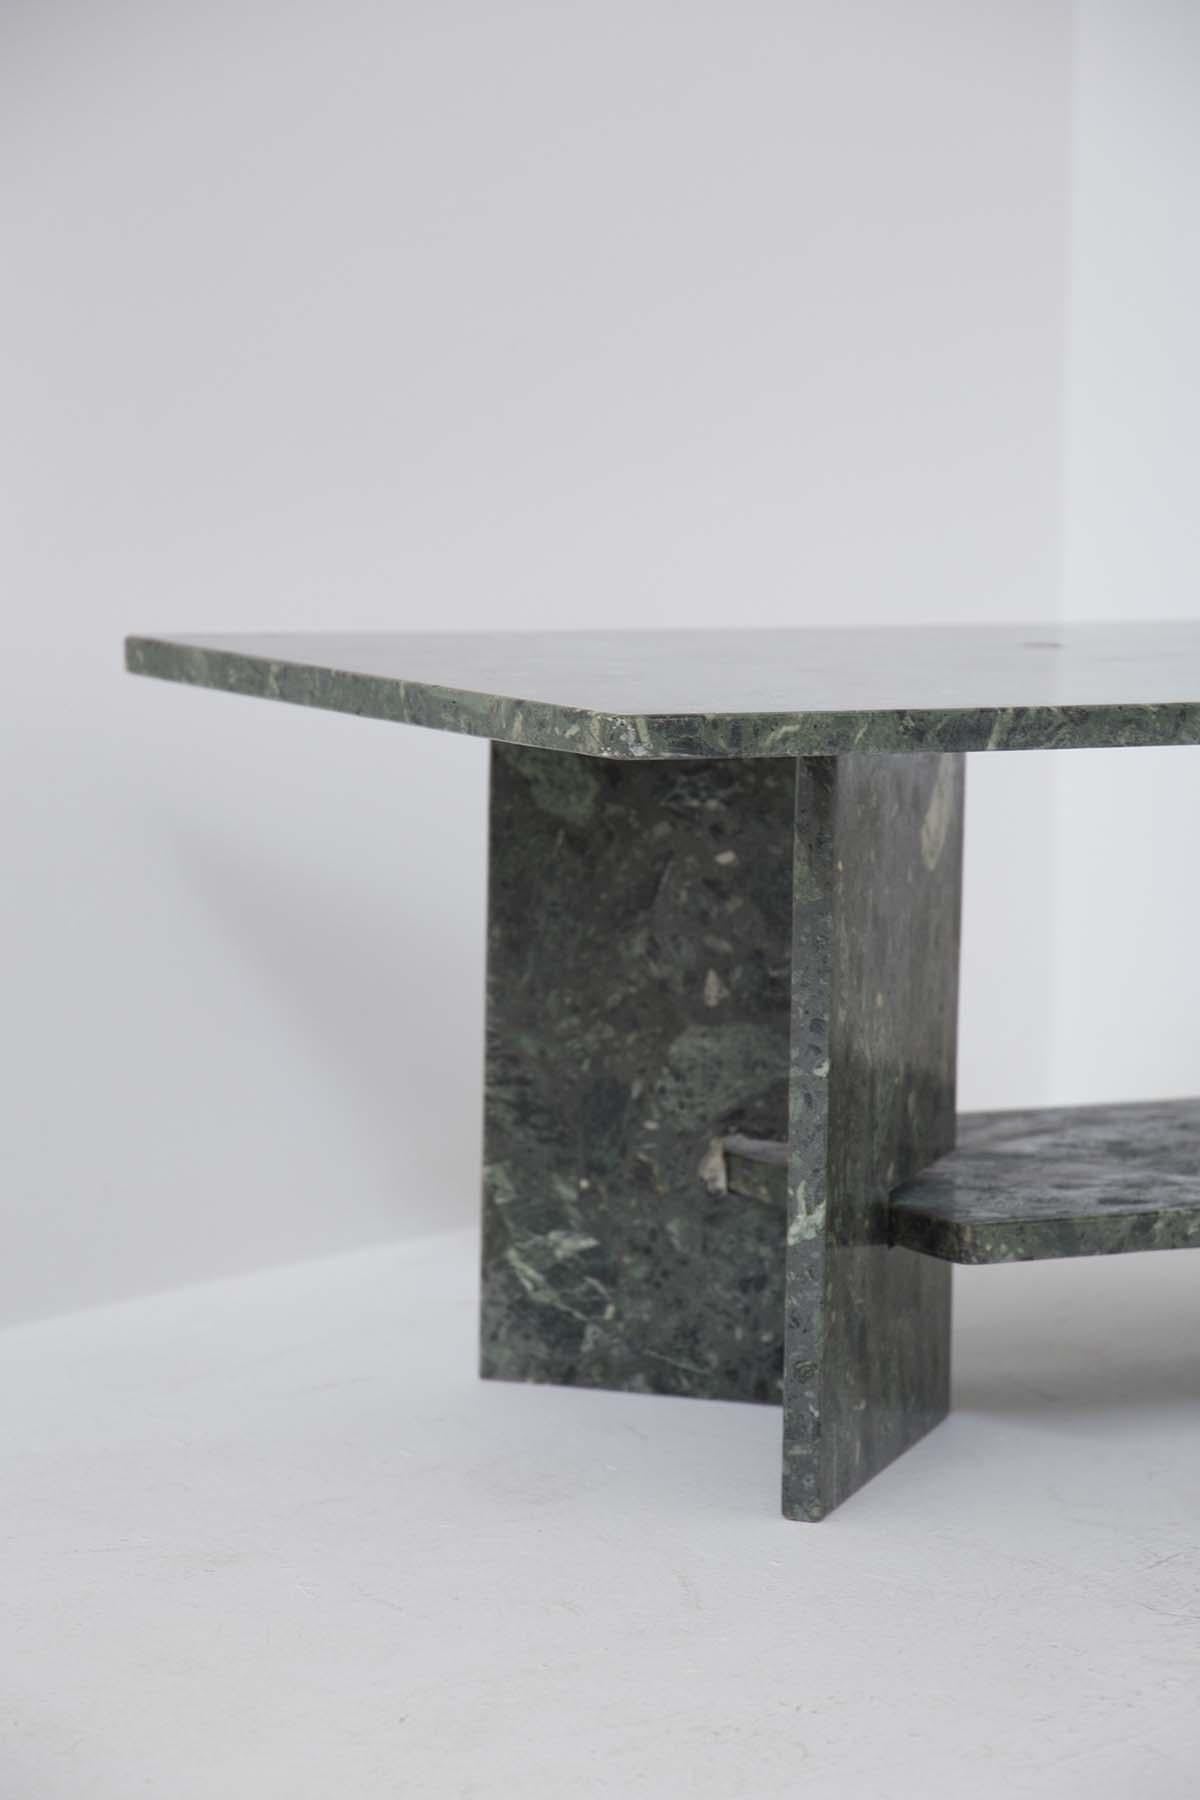 Gorgeous marble coffee table of fine Italian manufacture from the 1970s. The table is made entirely of green alps marble. The top is rectangular with two legs supporting the top, creating a V shape. In the middle of the two legs is inserted a second